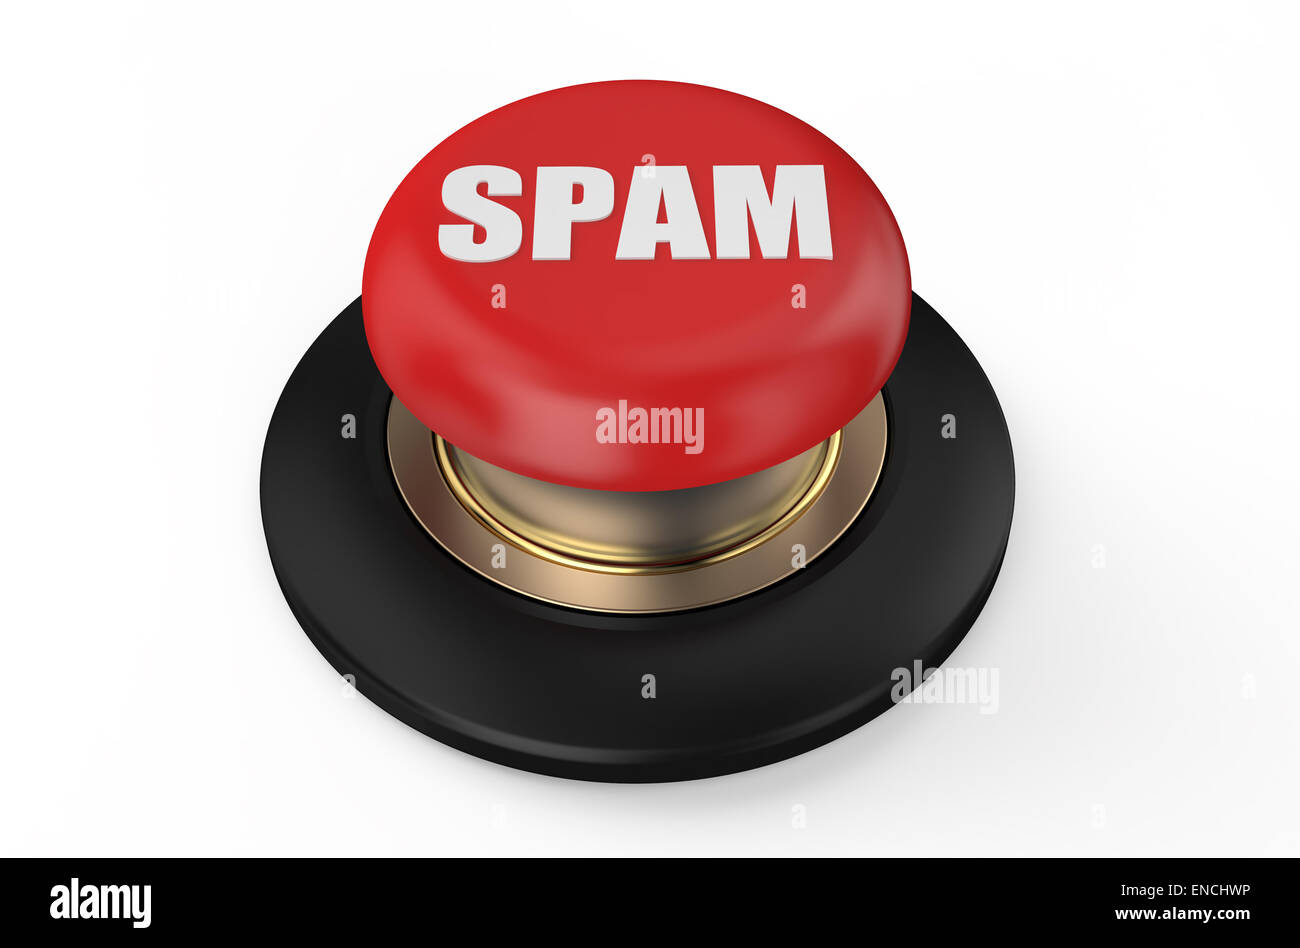 spam red button isolated on white background Stock Photo